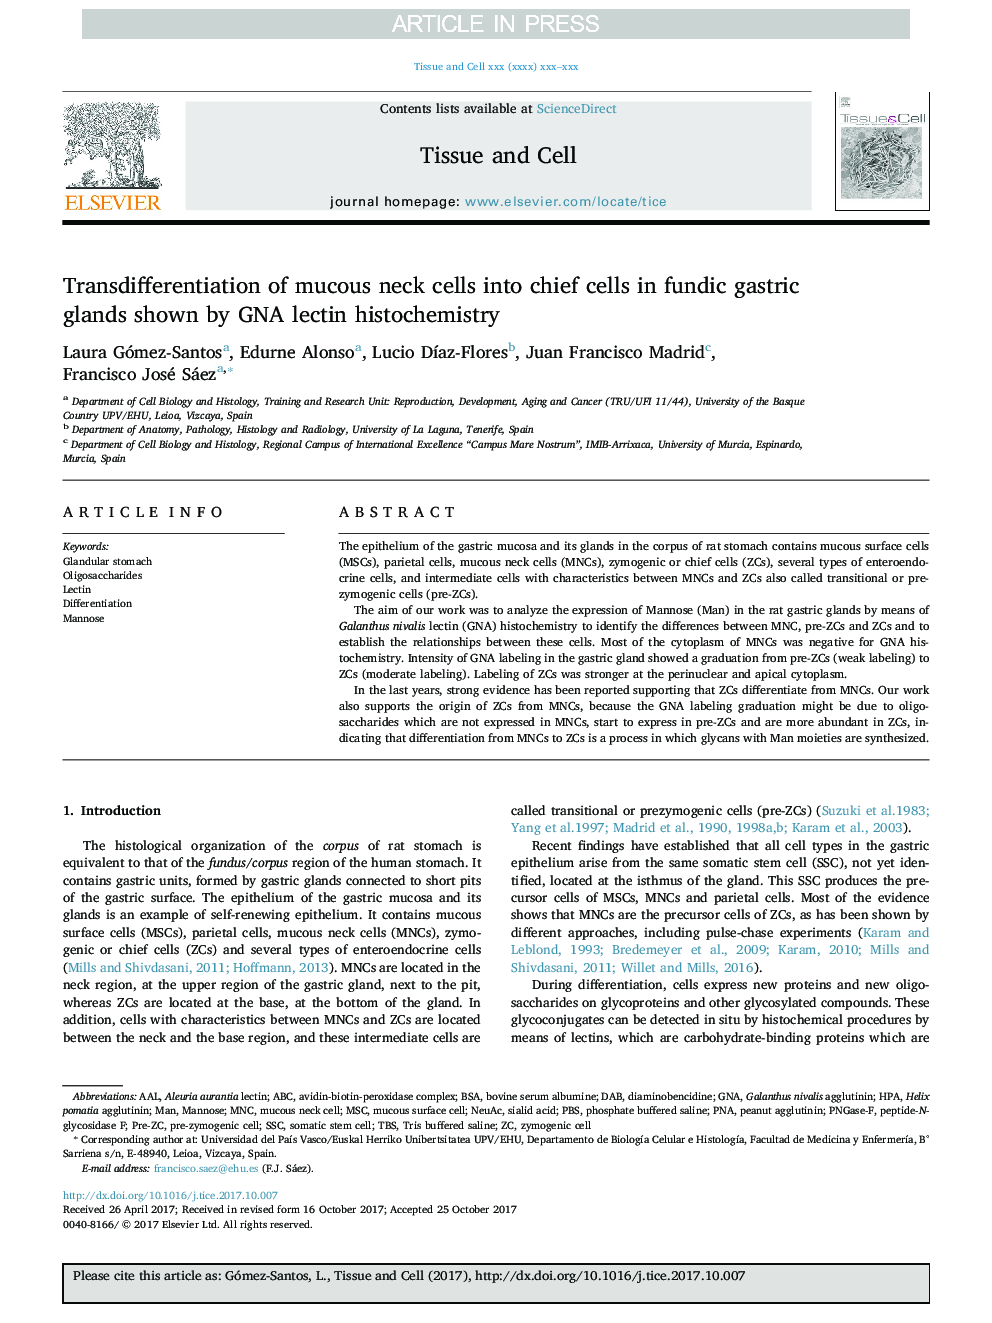 Transdifferentiation of mucous neck cells into chief cells in fundic gastric glands shown by GNA lectin histochemistry